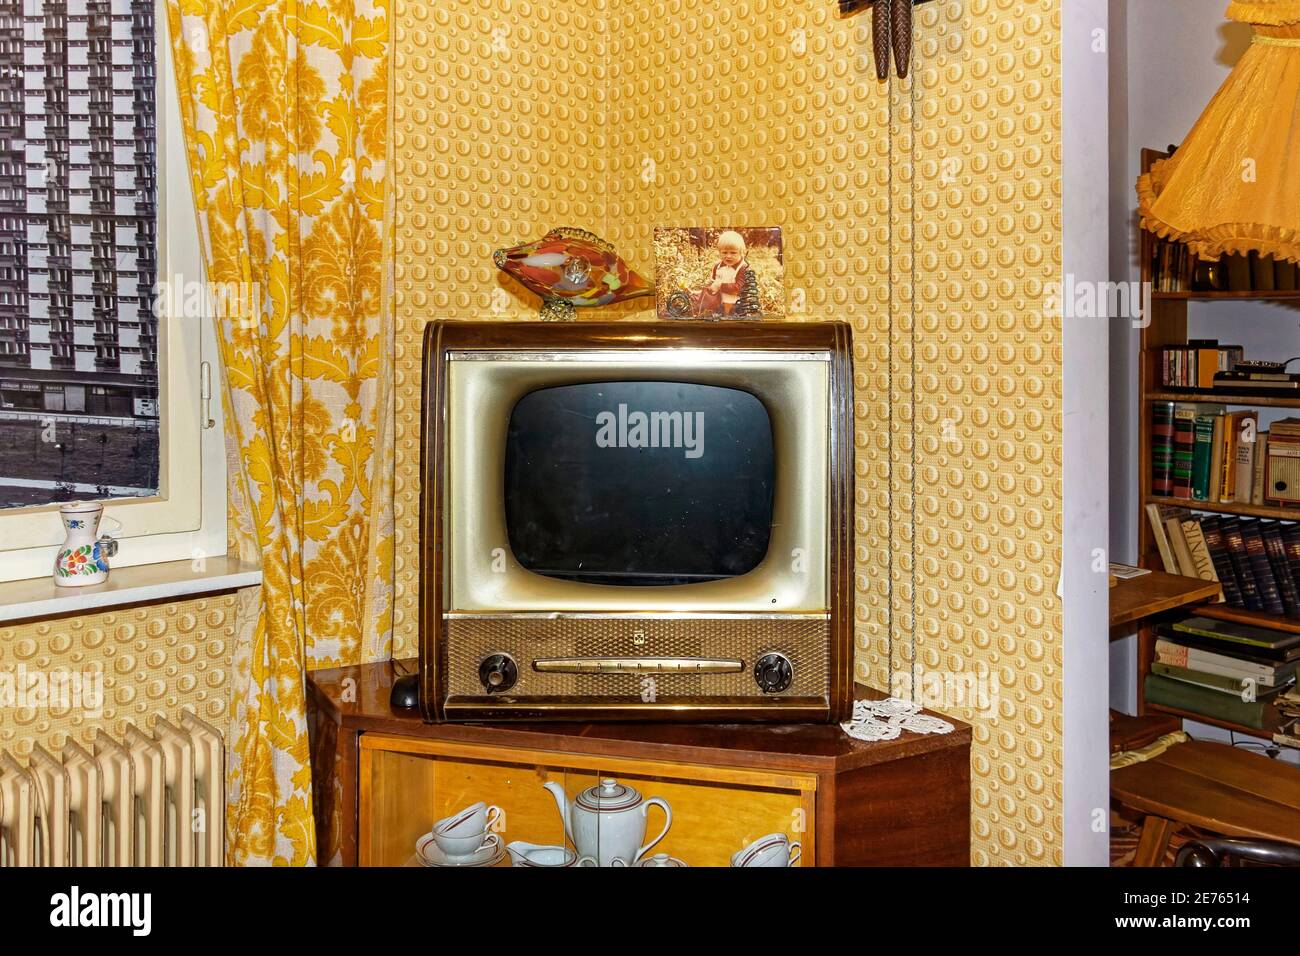 Warsaw, Poland - January 14, 2021. Old tv set in a living room from communism-era exhibited in Museum of Life under communism in Warsaw. Stock Photo